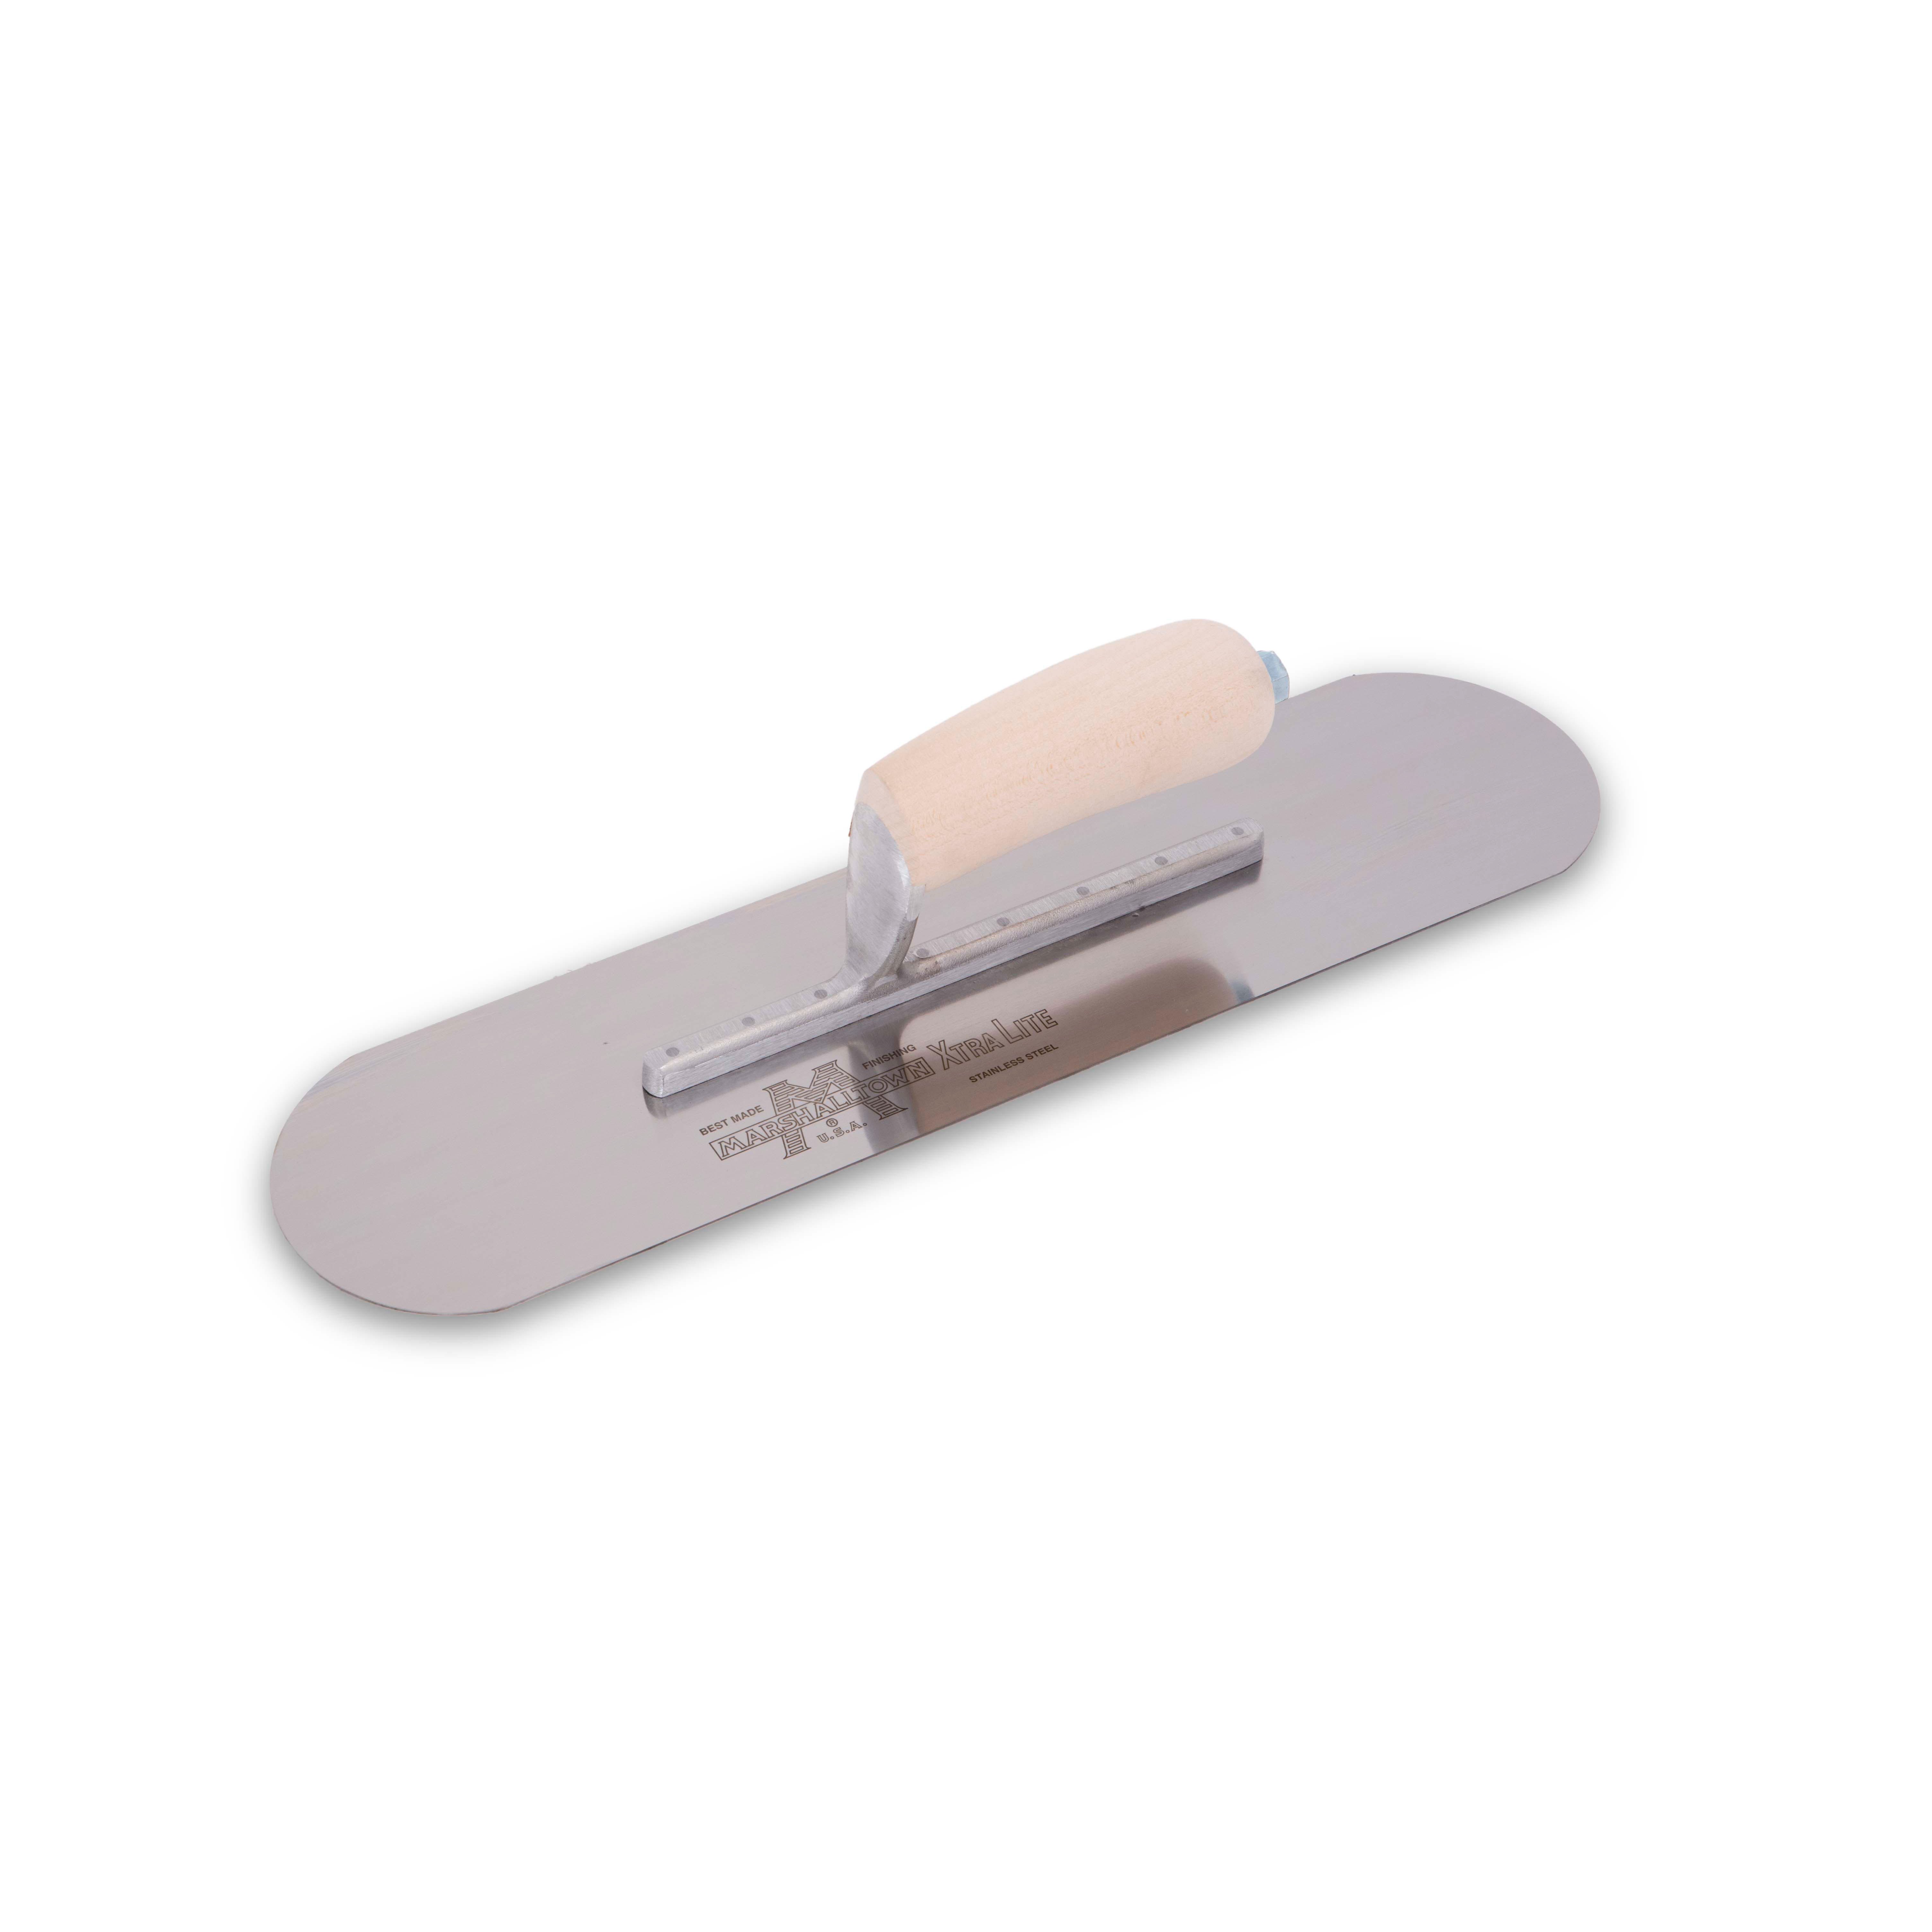 Marshalltown SP164SS 16in x 4in Stainless Steel Pool Trowel with Wood Handle SP164SS